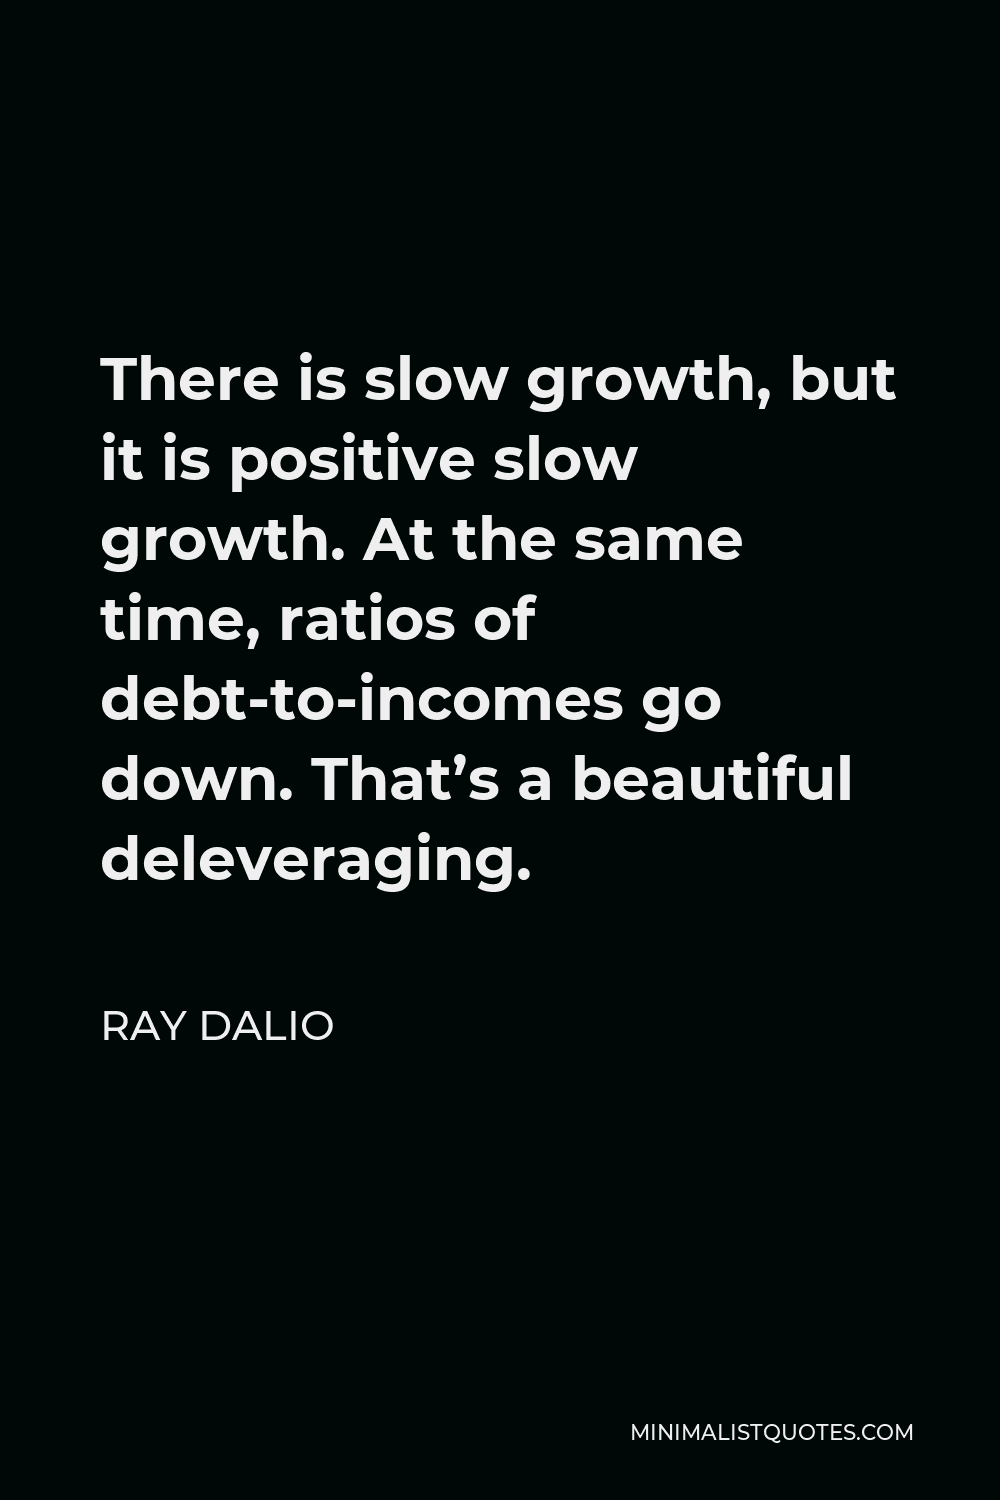 Ray Dalio Quote - There is slow growth, but it is positive slow growth. At the same time, ratios of debt-to-incomes go down. That’s a beautiful deleveraging.